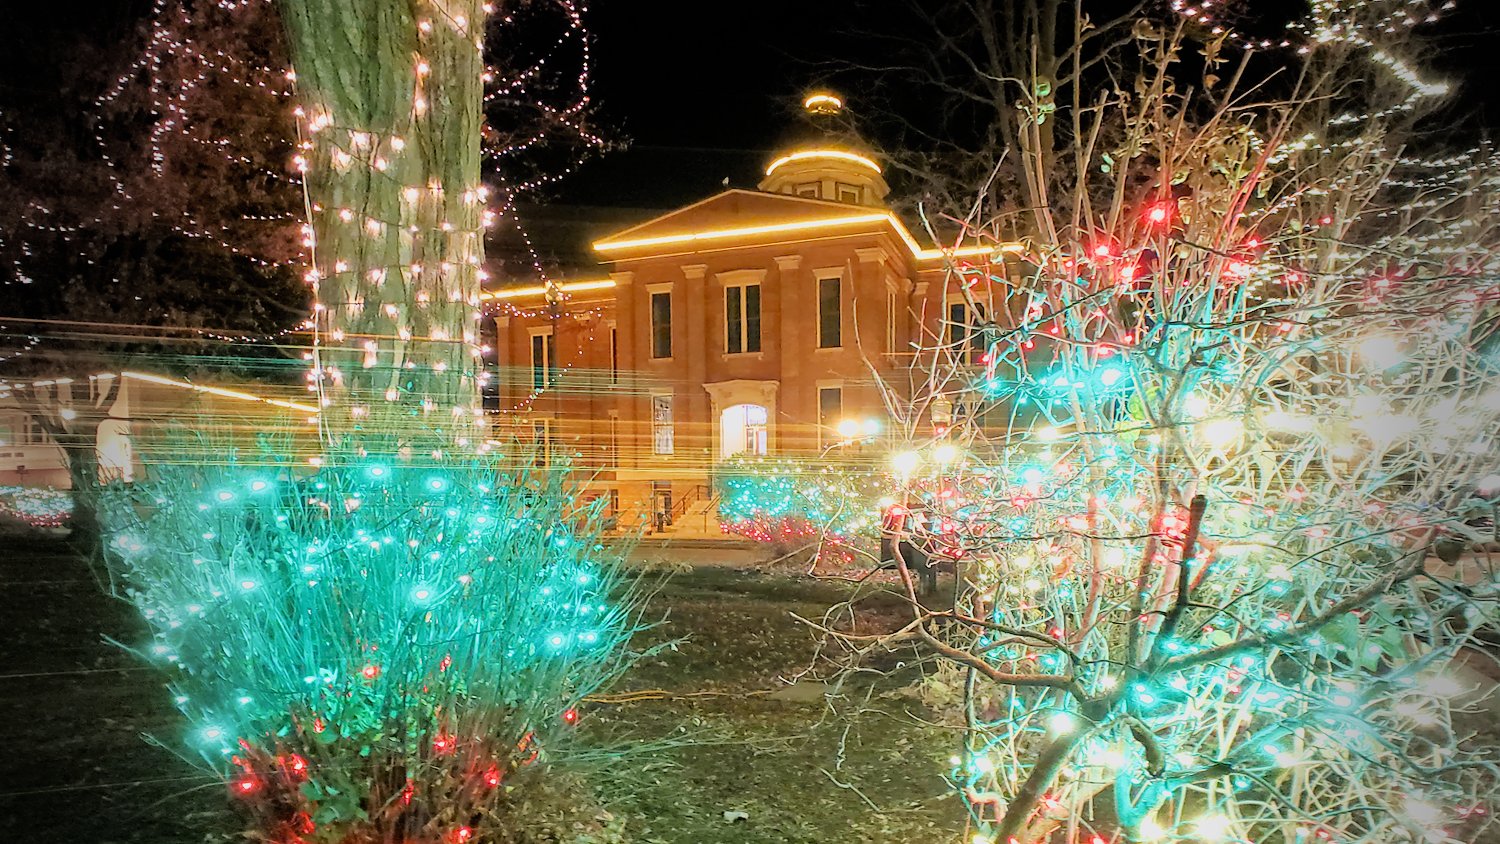 Lighted display with the Old Courthouse in the background at the Historic Square in Woodstock, IL.